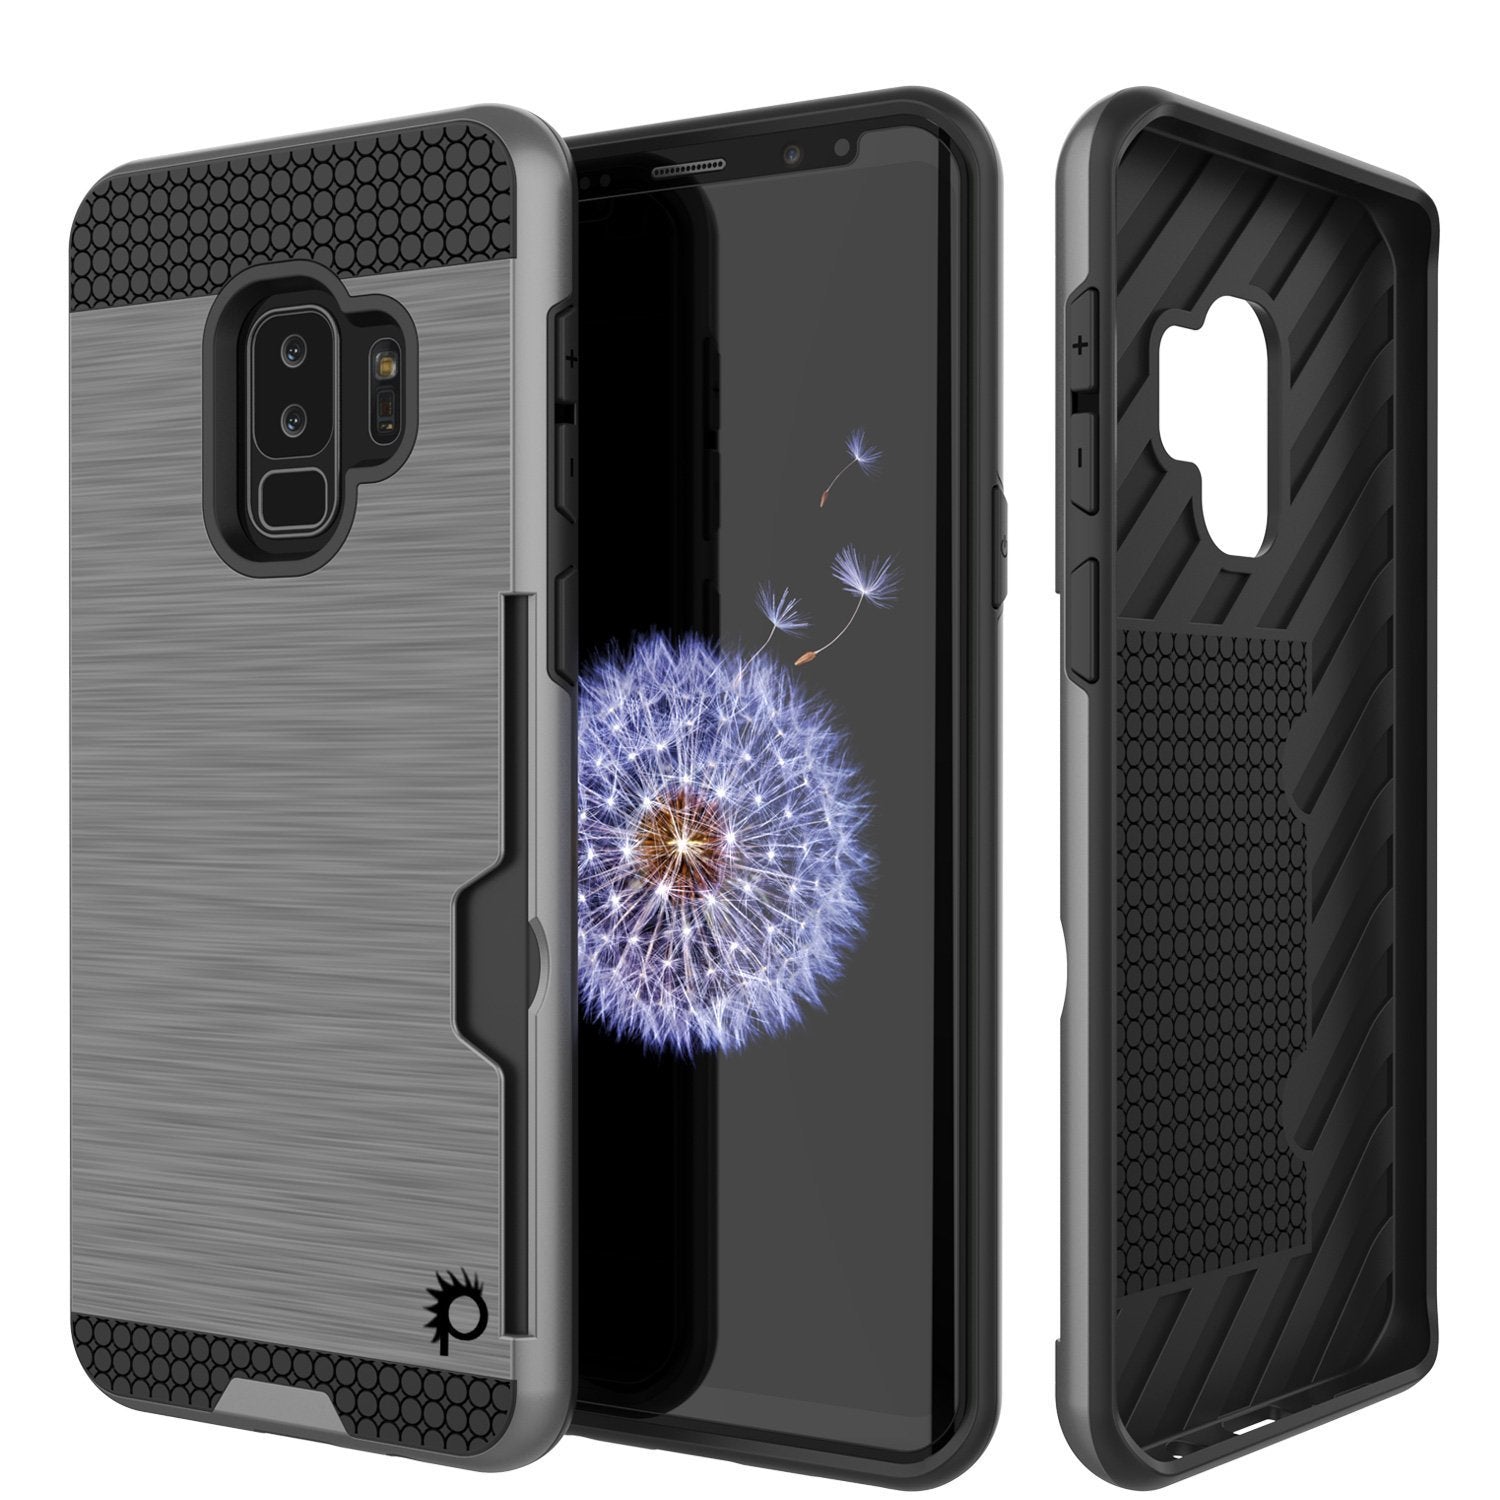 Galaxy S9 Plus Case, PUNKcase [SLOT Series] [Slim Fit] Dual-Layer Armor Cover w/Integrated Anti-Shock System [Grey]